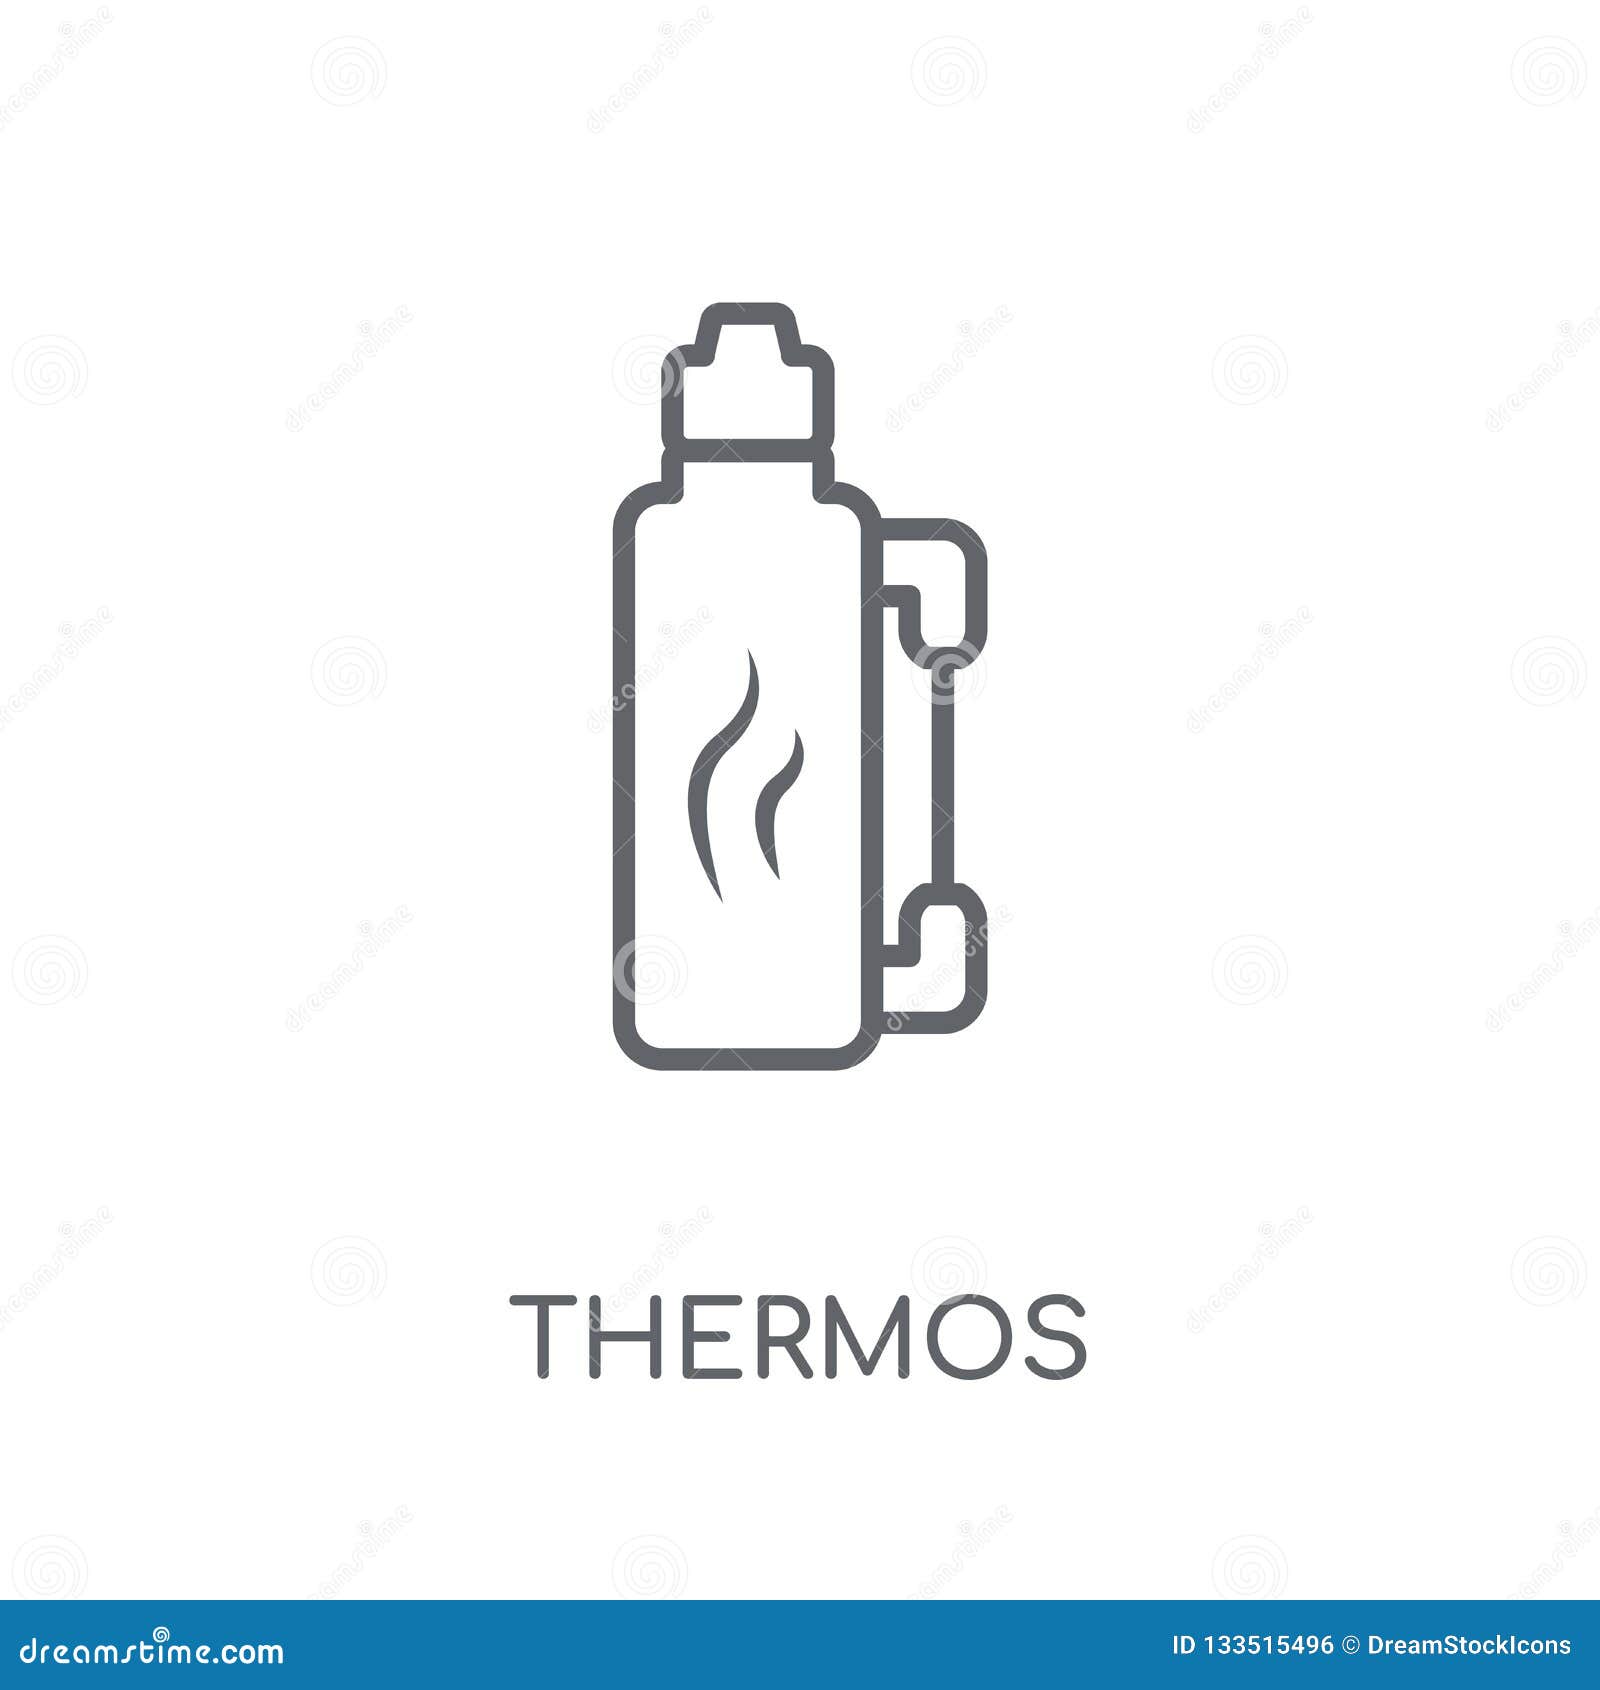 https://thumbs.dreamstime.com/z/thermos-linear-icon-modern-outline-logo-concept-whit-white-background-camping-collection-suitable-use-web-apps-mobile-133515496.jpg